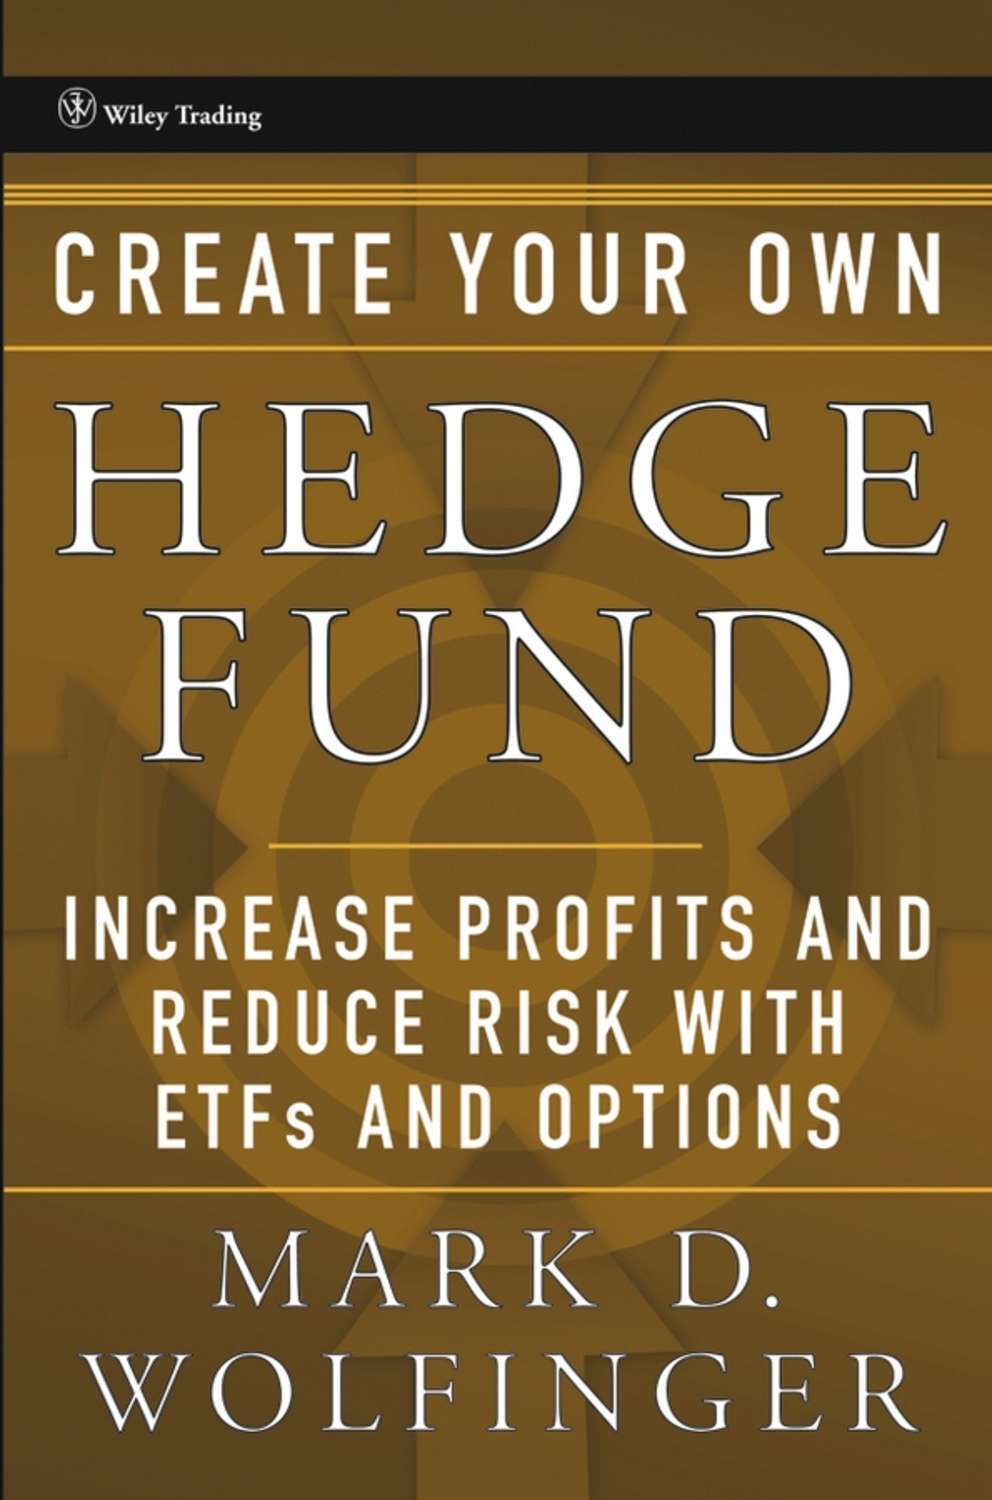 Mark option. Create your own ETF Hedge Fund.